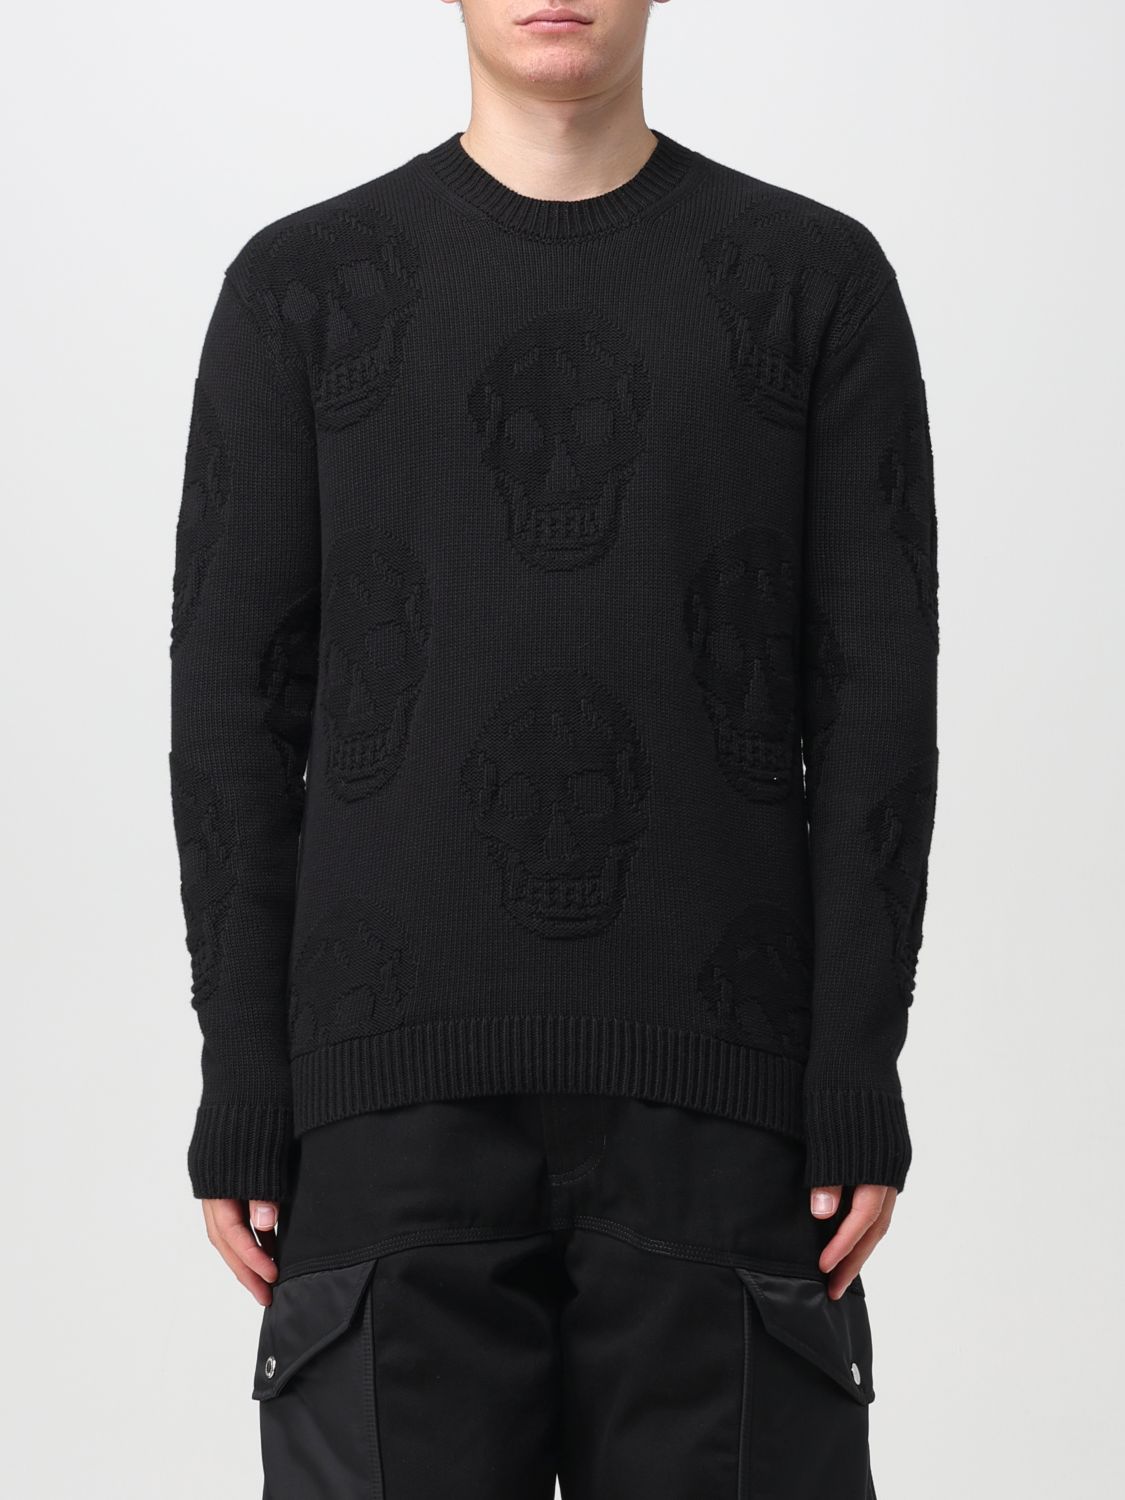 Alexander Mcqueen Sweater With All-over Skull In Black